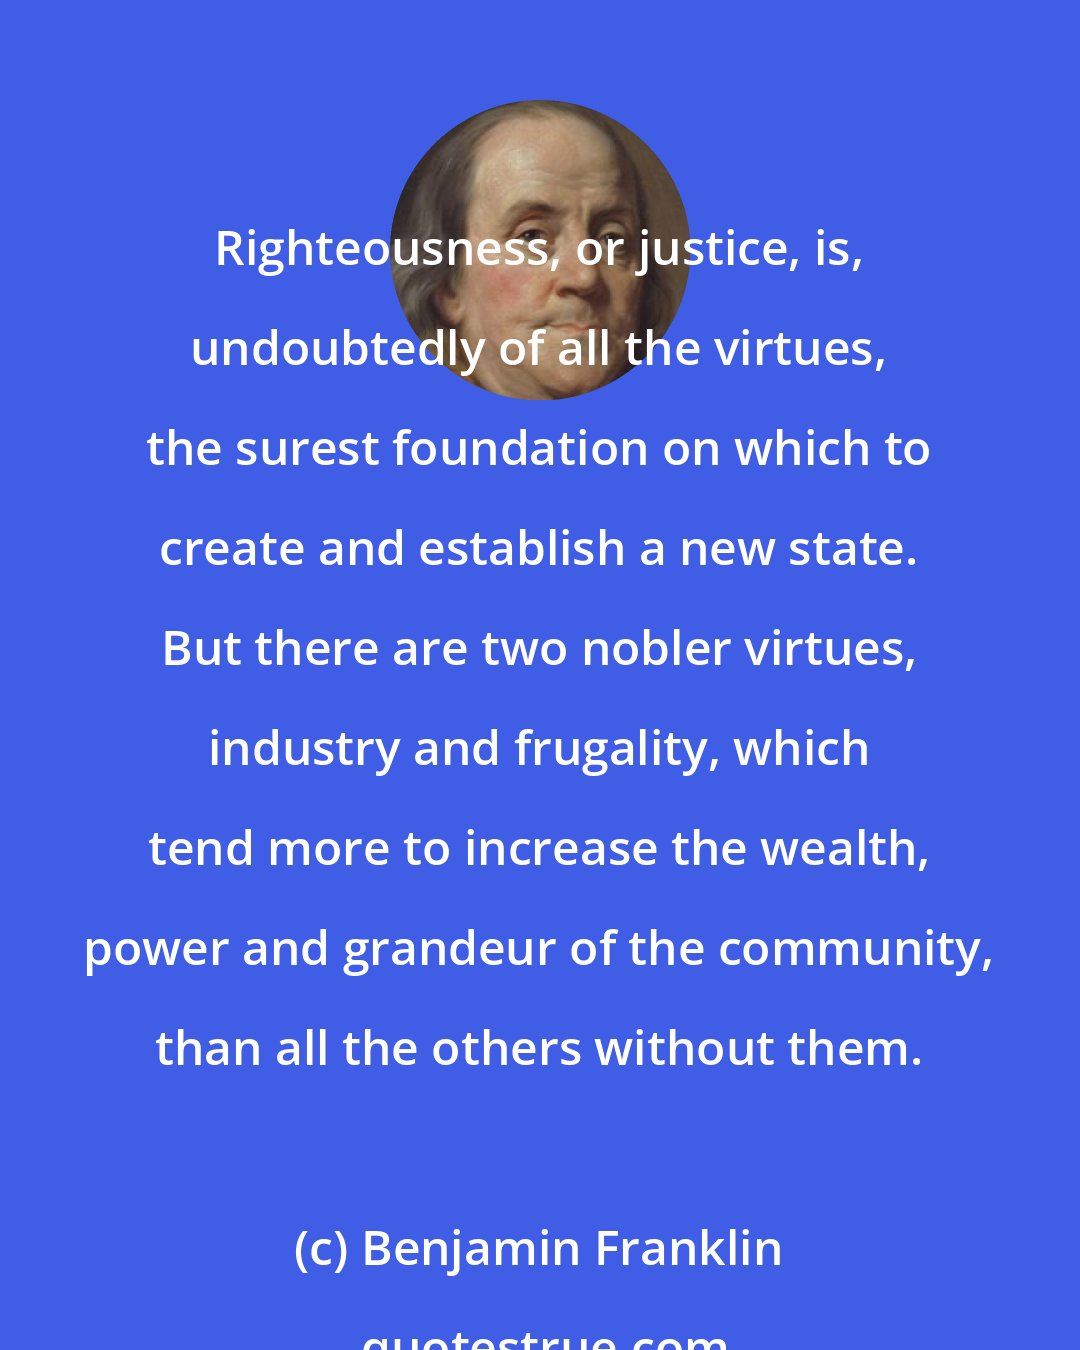 Benjamin Franklin: Righteousness, or justice, is, undoubtedly of all the virtues, the surest foundation on which to create and establish a new state. But there are two nobler virtues, industry and frugality, which tend more to increase the wealth, power and grandeur of the community, than all the others without them.